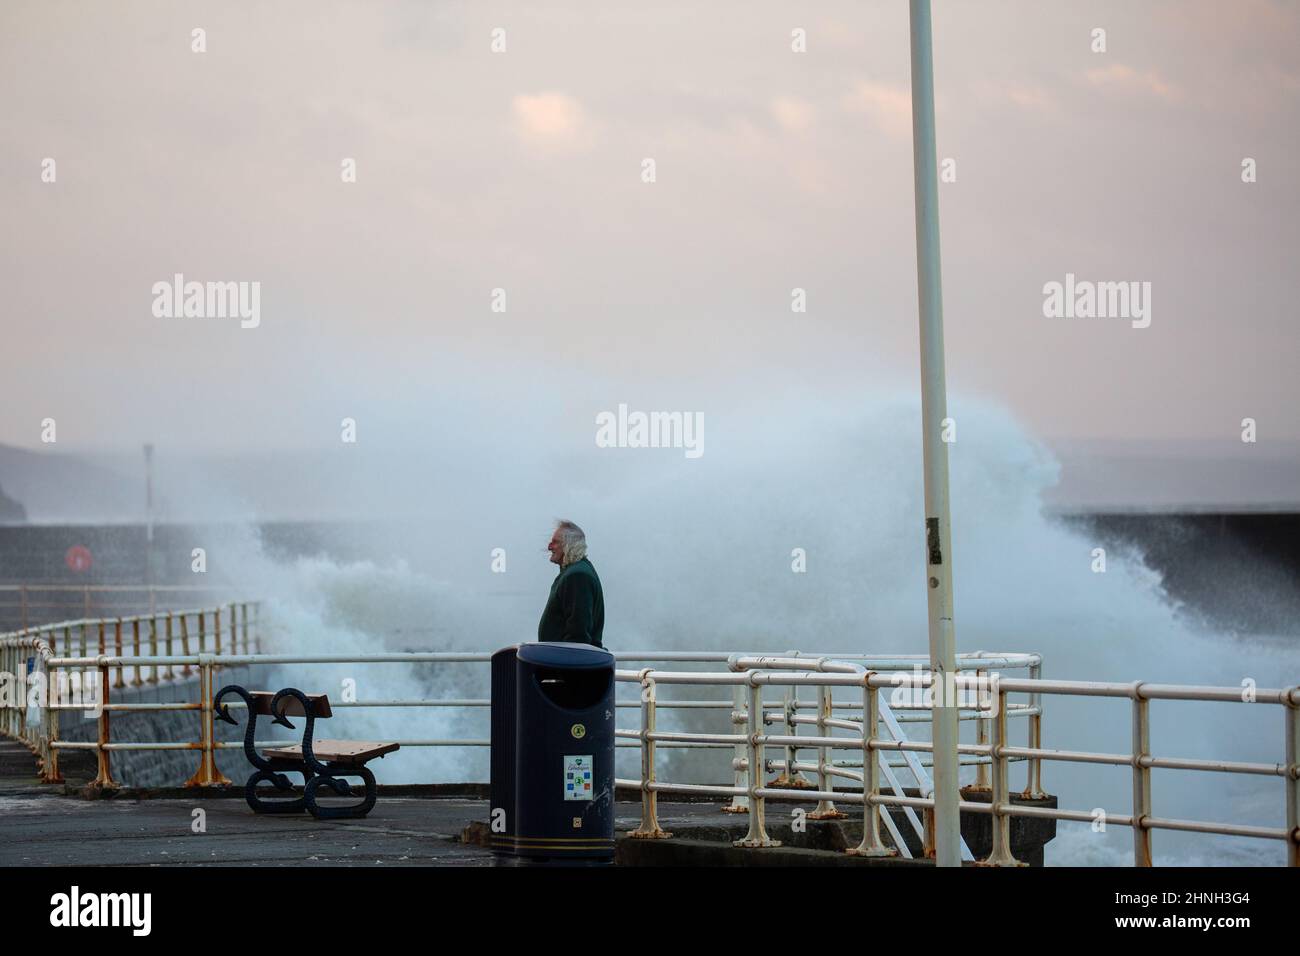 Aberystwyth, Ceredigion, Wales, UK. 17th February 2022 UK Weather: Strong winds continue along the west coast of Aberystwyth as stormy seas crash against the promenade. With further stormy weather expected tomorrow from storm Eunice. © Ian Jones/Alamy Live News Stock Photo